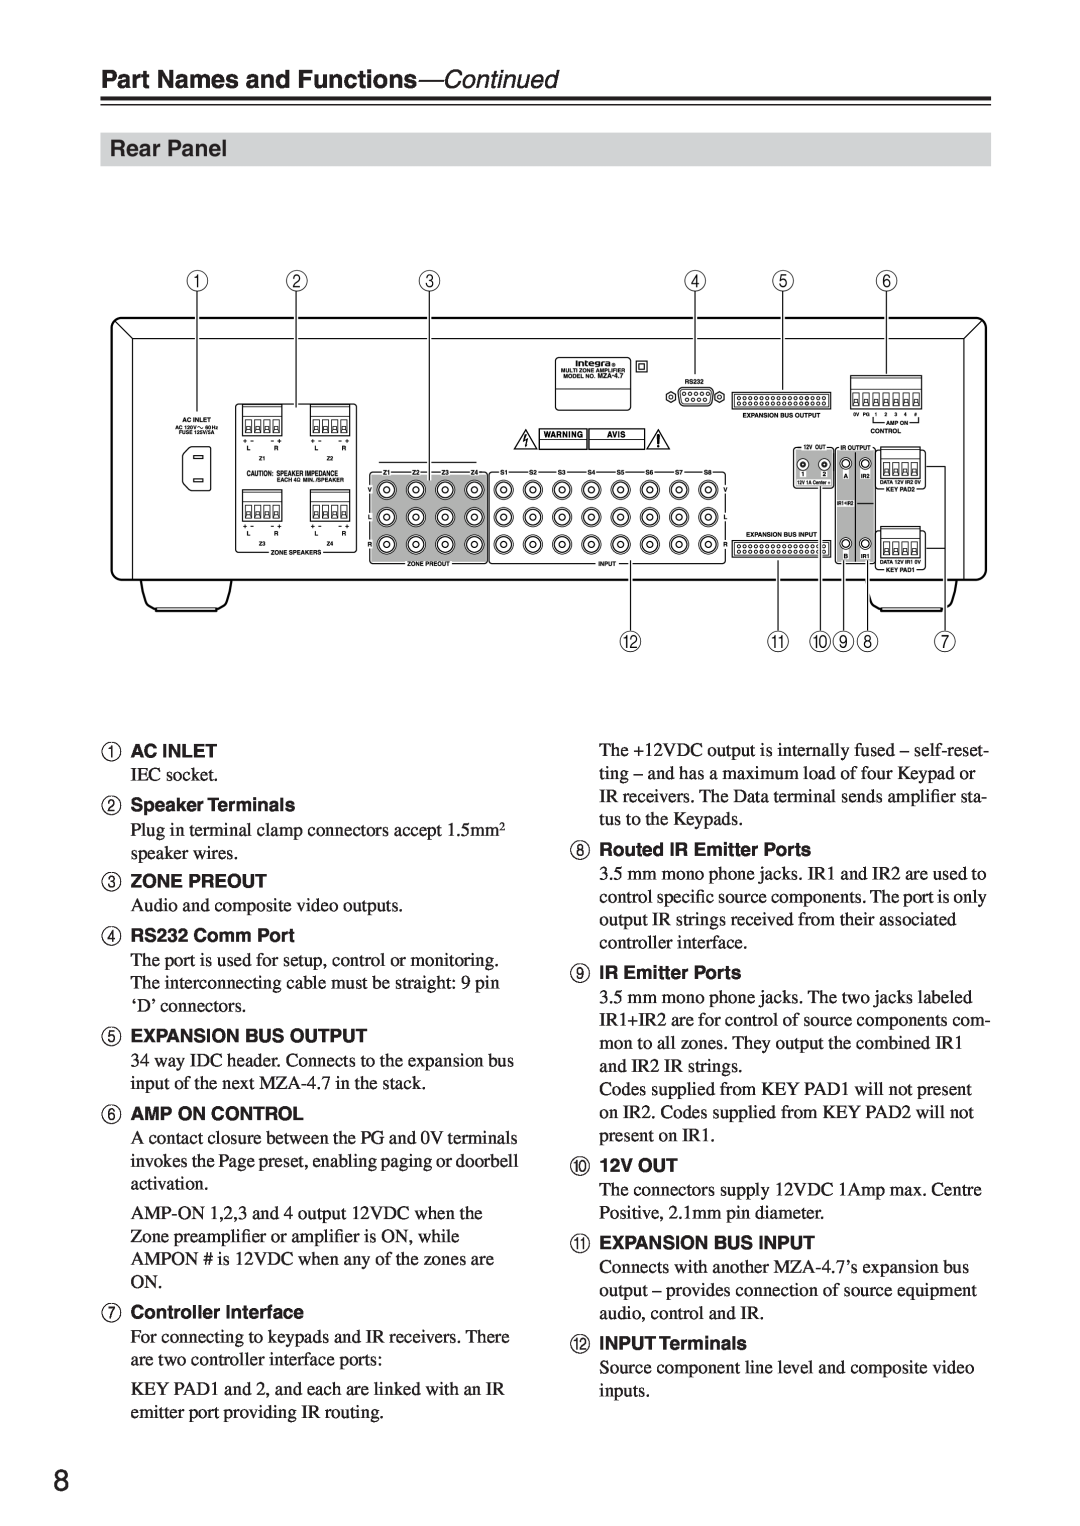 Integra MZA-4.7 instruction manual Part Names and Functions-Continued, Rear Panel, L K J98 